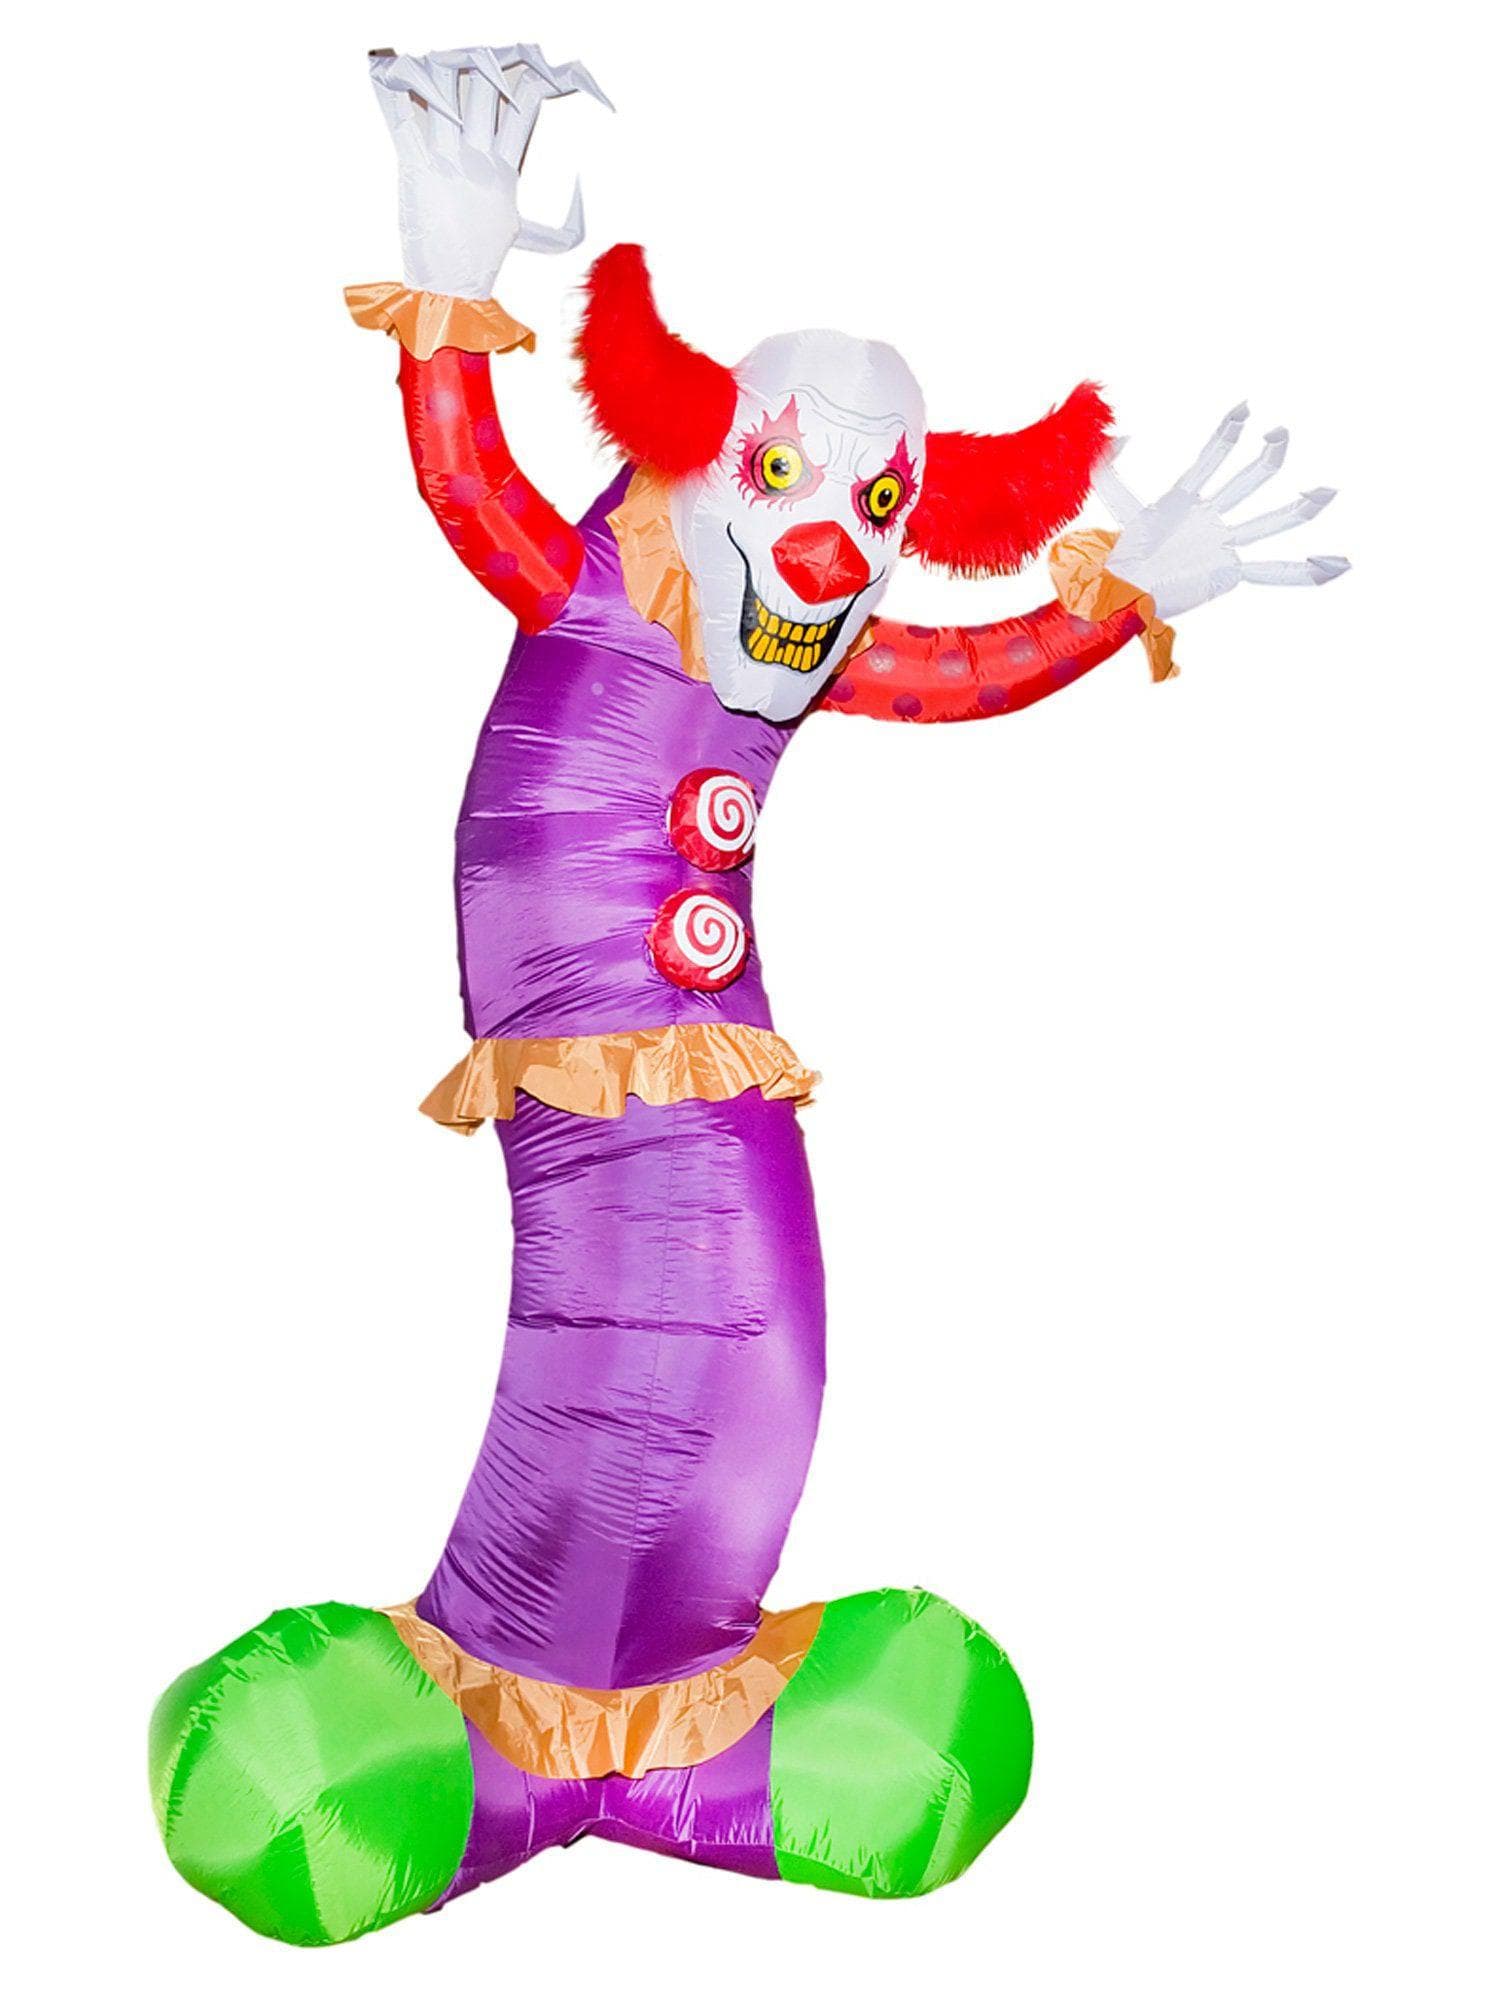 Giant Clown Inflatable - costumes.com